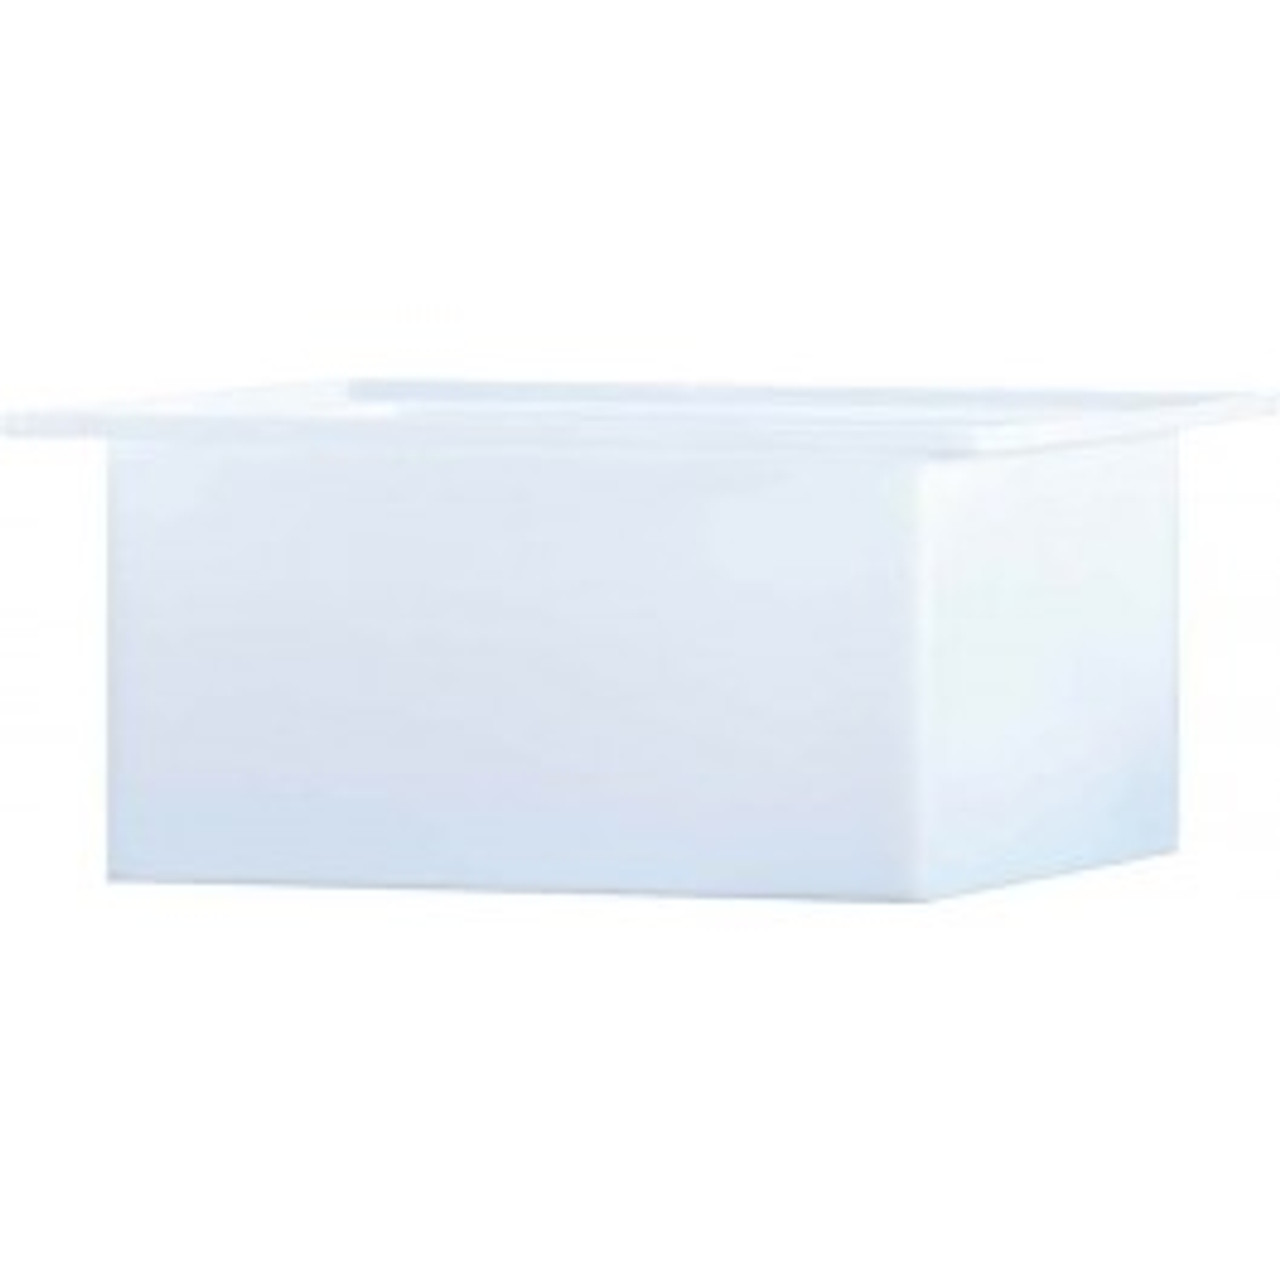 An image of a 60 Gallon PE Chem-Tainer White Rectangular Open Top Tank | R244812A